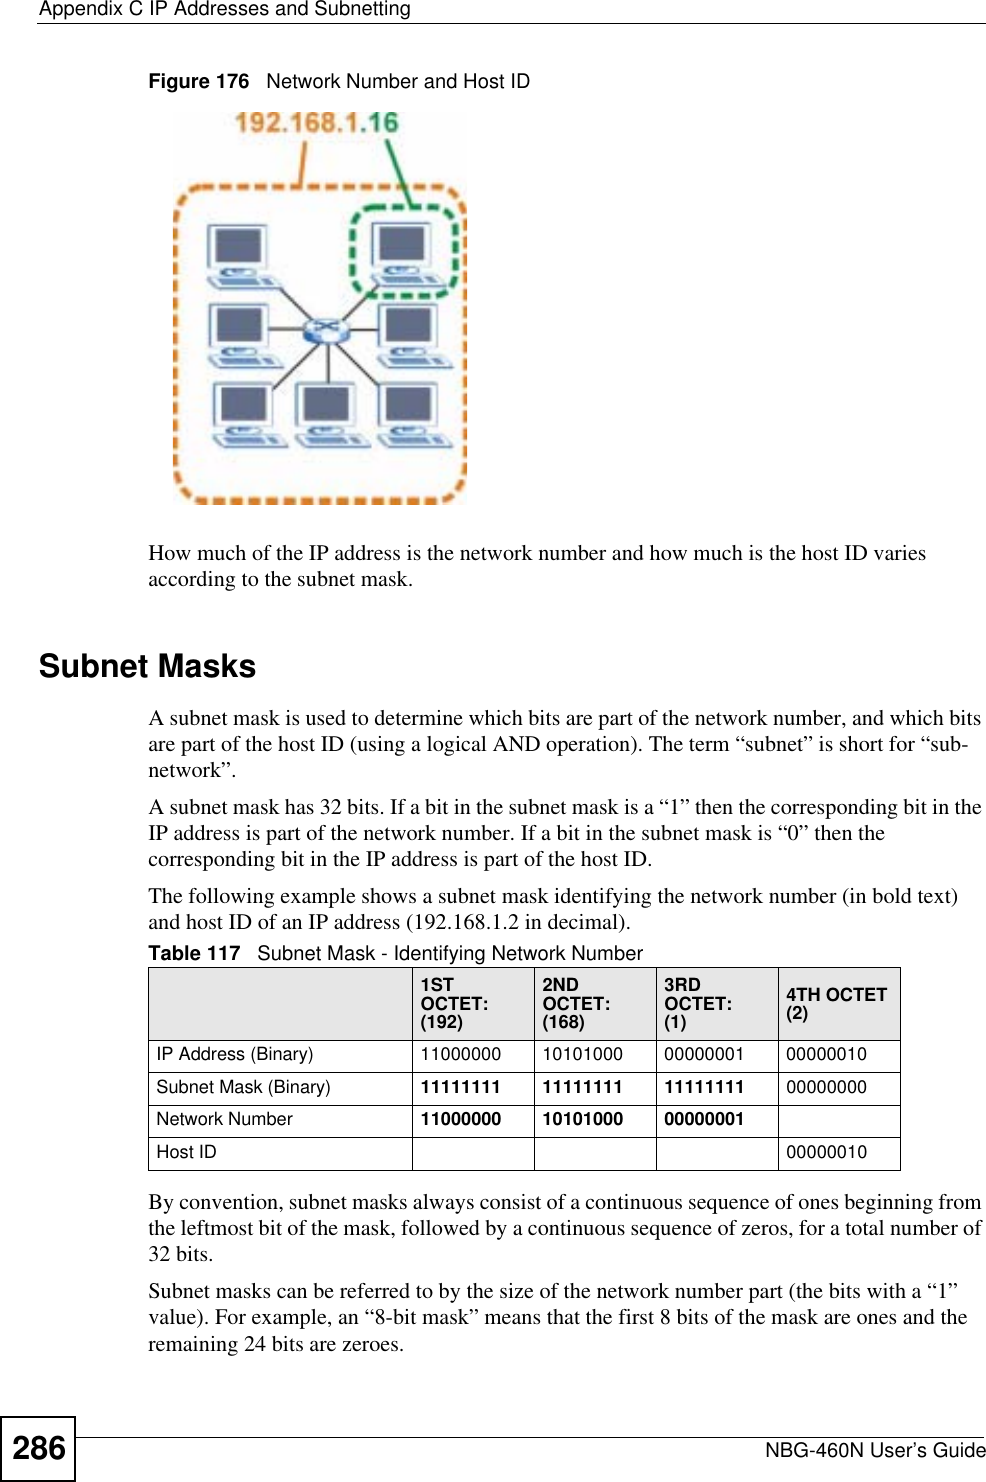 Appendix C IP Addresses and SubnettingNBG-460N User’s Guide286Figure 176   Network Number and Host IDHow much of the IP address is the network number and how much is the host ID varies according to the subnet mask. Subnet MasksA subnet mask is used to determine which bits are part of the network number, and which bits are part of the host ID (using a logical AND operation). The term “subnet” is short for “sub-network”.A subnet mask has 32 bits. If a bit in the subnet mask is a “1” then the corresponding bit in the IP address is part of the network number. If a bit in the subnet mask is “0” then the corresponding bit in the IP address is part of the host ID. The following example shows a subnet mask identifying the network number (in bold text) and host ID of an IP address (192.168.1.2 in decimal).By convention, subnet masks always consist of a continuous sequence of ones beginning from the leftmost bit of the mask, followed by a continuous sequence of zeros, for a total number of 32 bits.Subnet masks can be referred to by the size of the network number part (the bits with a “1” value). For example, an “8-bit mask” means that the first 8 bits of the mask are ones and the remaining 24 bits are zeroes.Table 117   Subnet Mask - Identifying Network Number1ST OCTET:(192)2ND OCTET:(168)3RD OCTET:(1)4TH OCTET(2)IP Address (Binary) 11000000 10101000 00000001 00000010Subnet Mask (Binary) 11111111 11111111 11111111 00000000Network Number 11000000 10101000 00000001Host ID 00000010